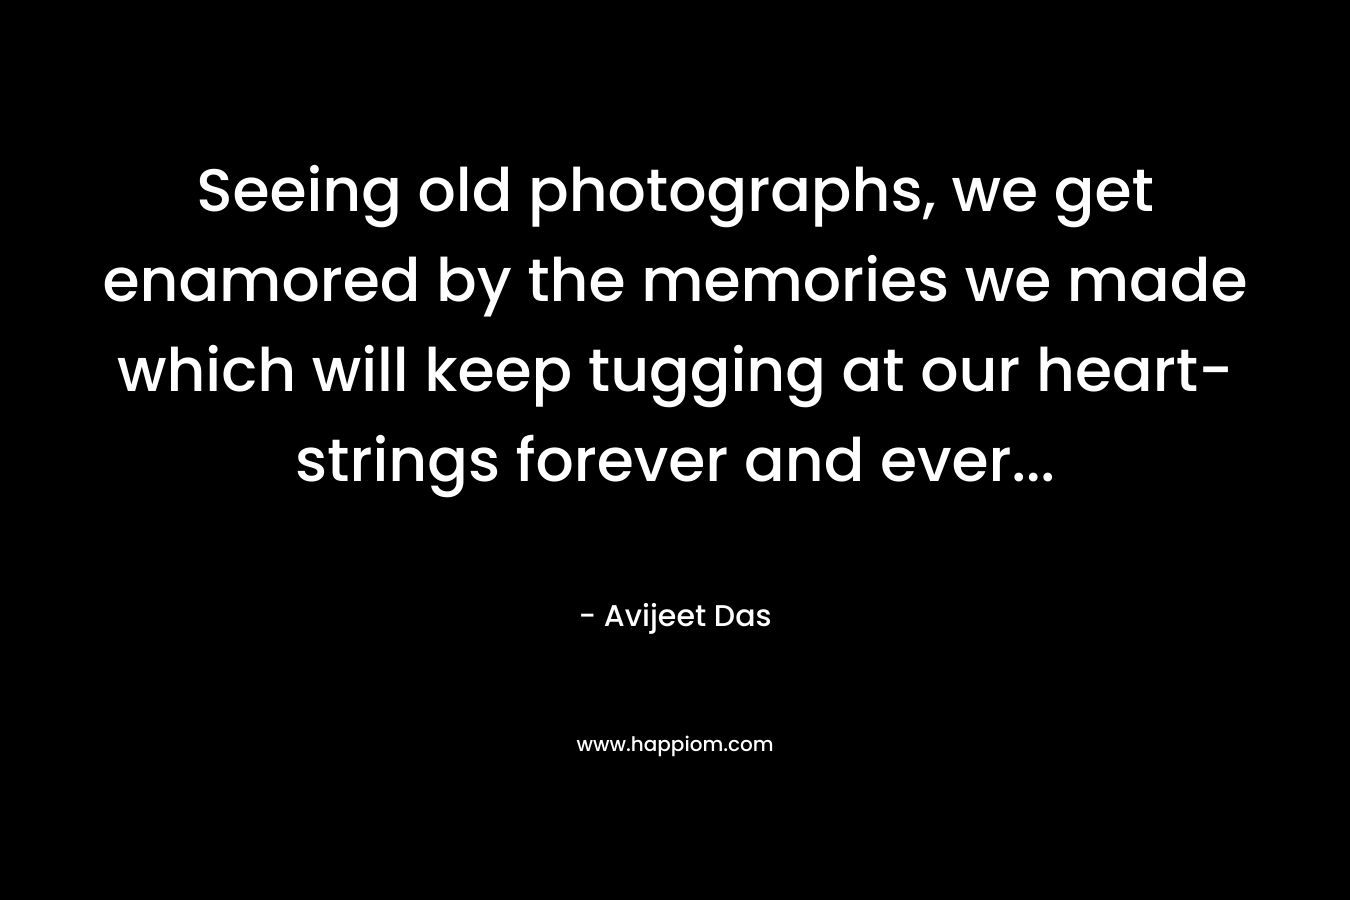 Seeing old photographs, we get enamored by the memories we made which will keep tugging at our heart-strings forever and ever...